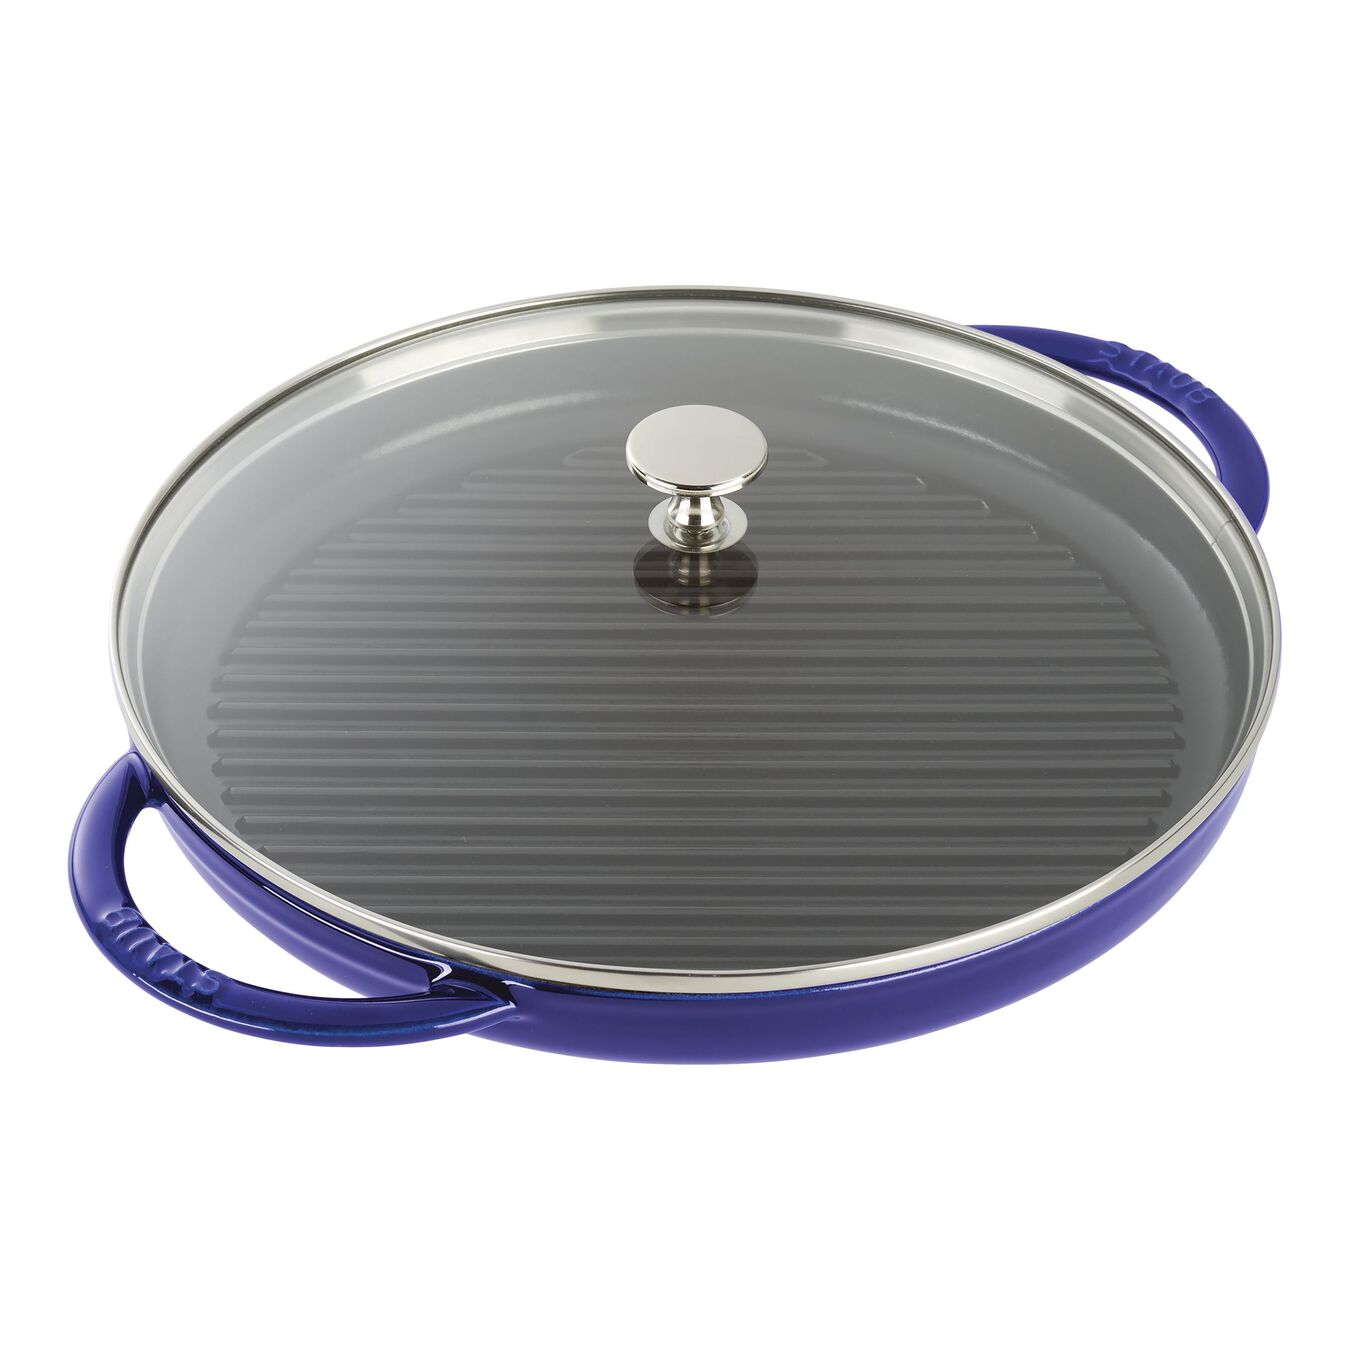 round, Grill pan with glass lid, dark blue,,large 1